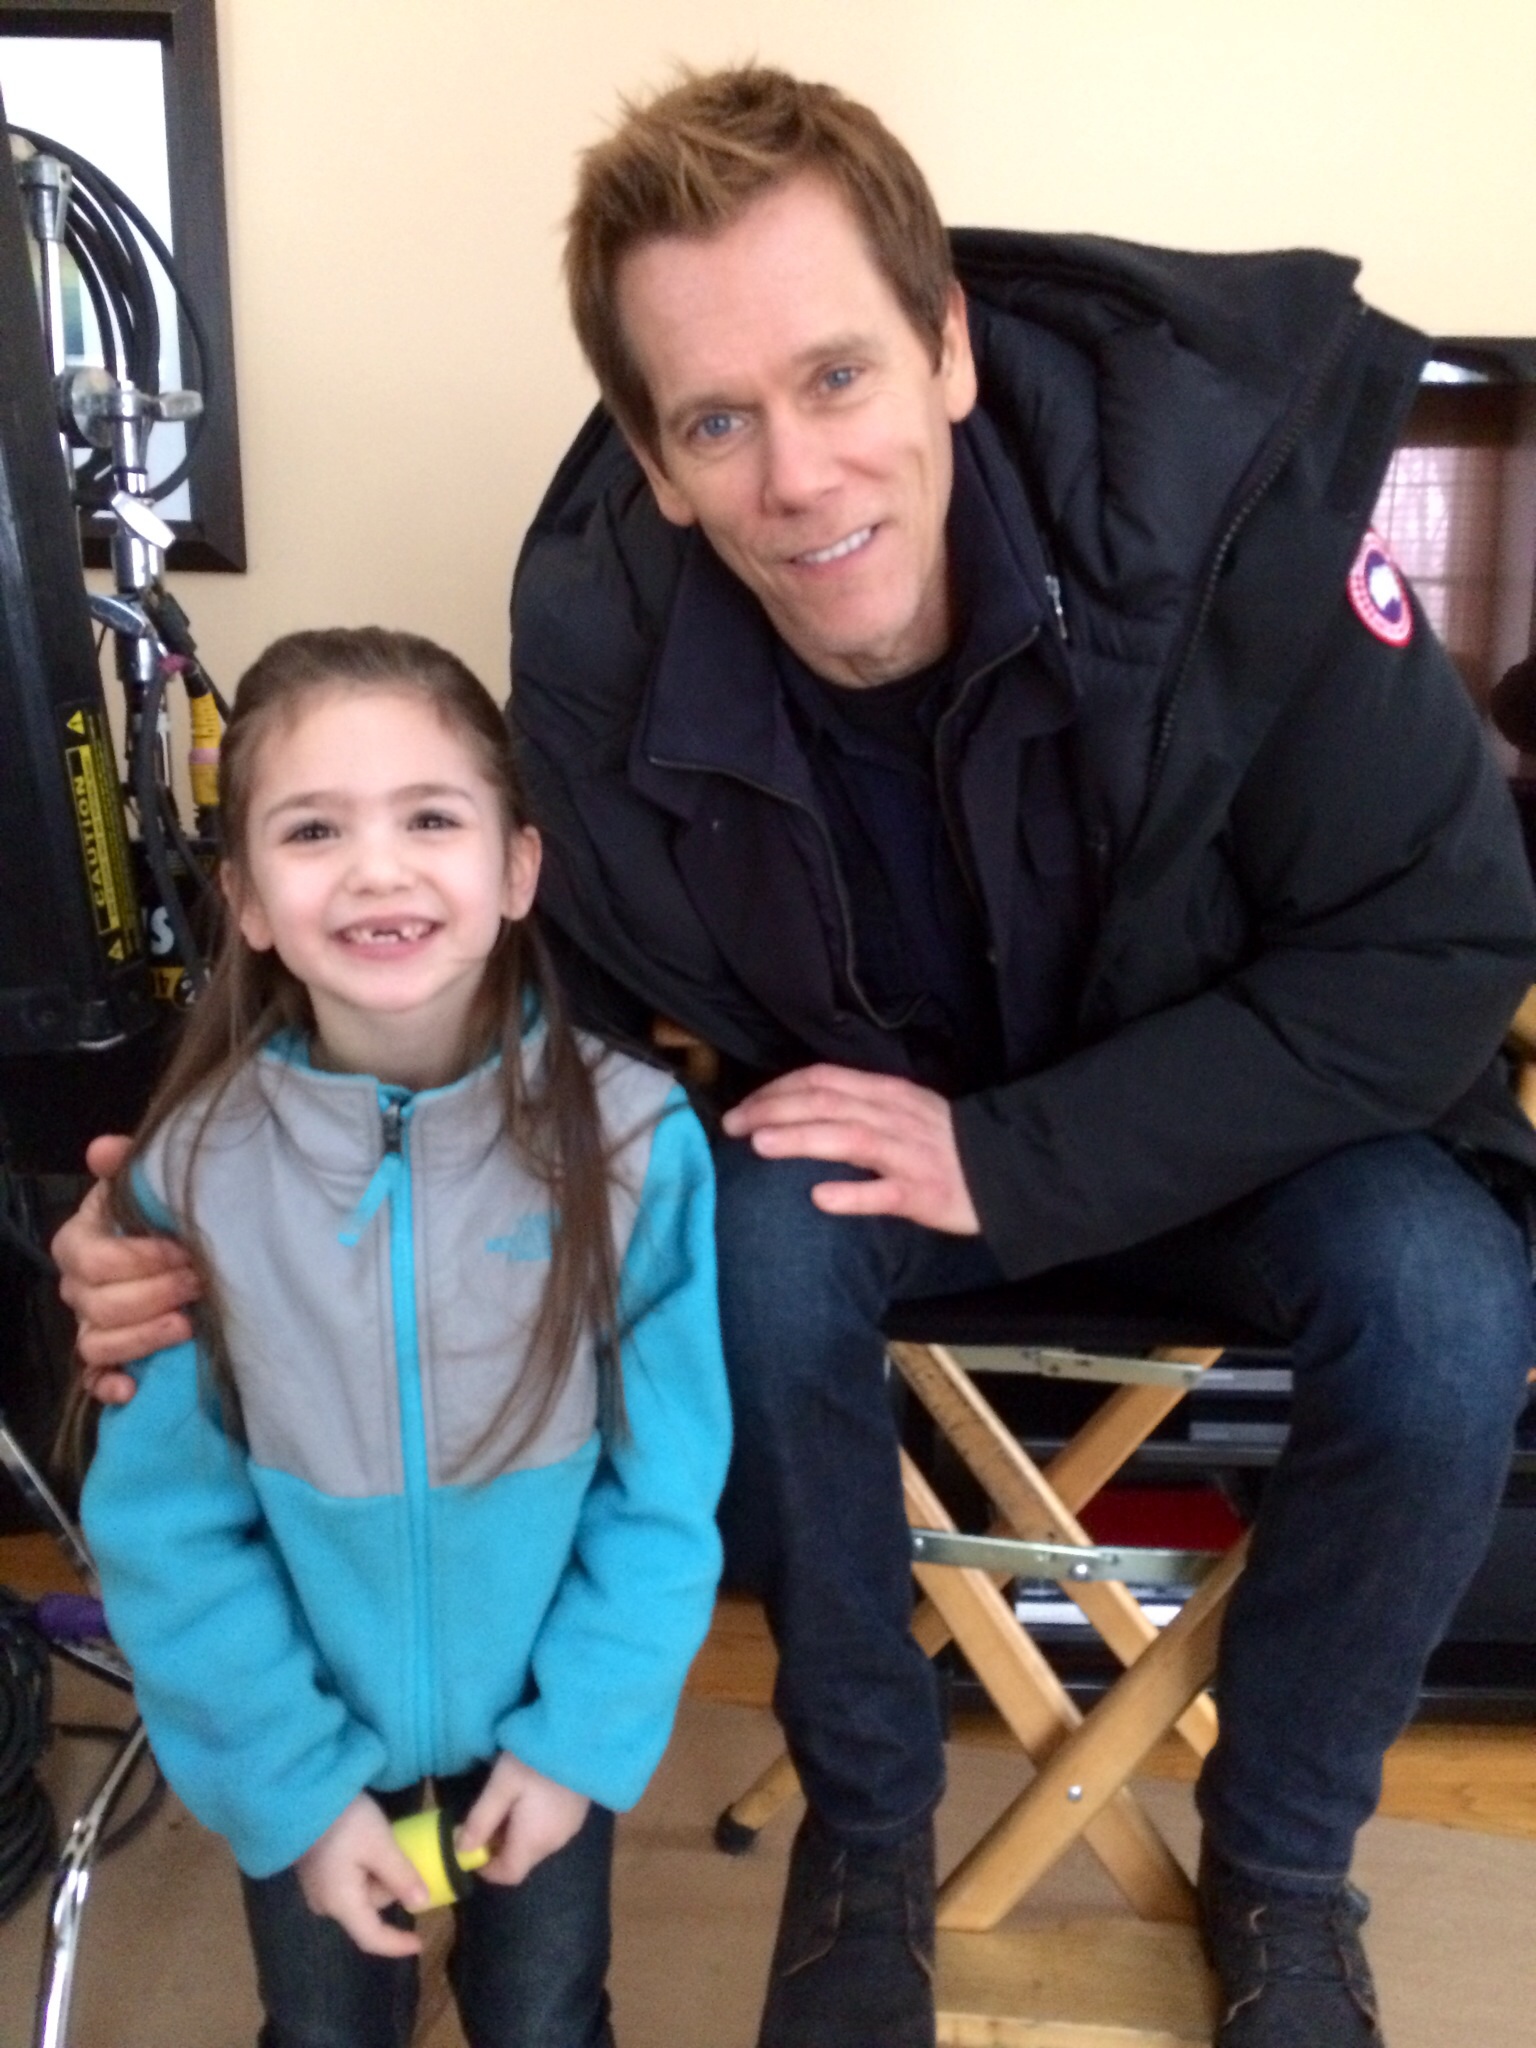 Shayne on set of The Following with Kevin Bacon Shayne plays the role of Andrea Murphy